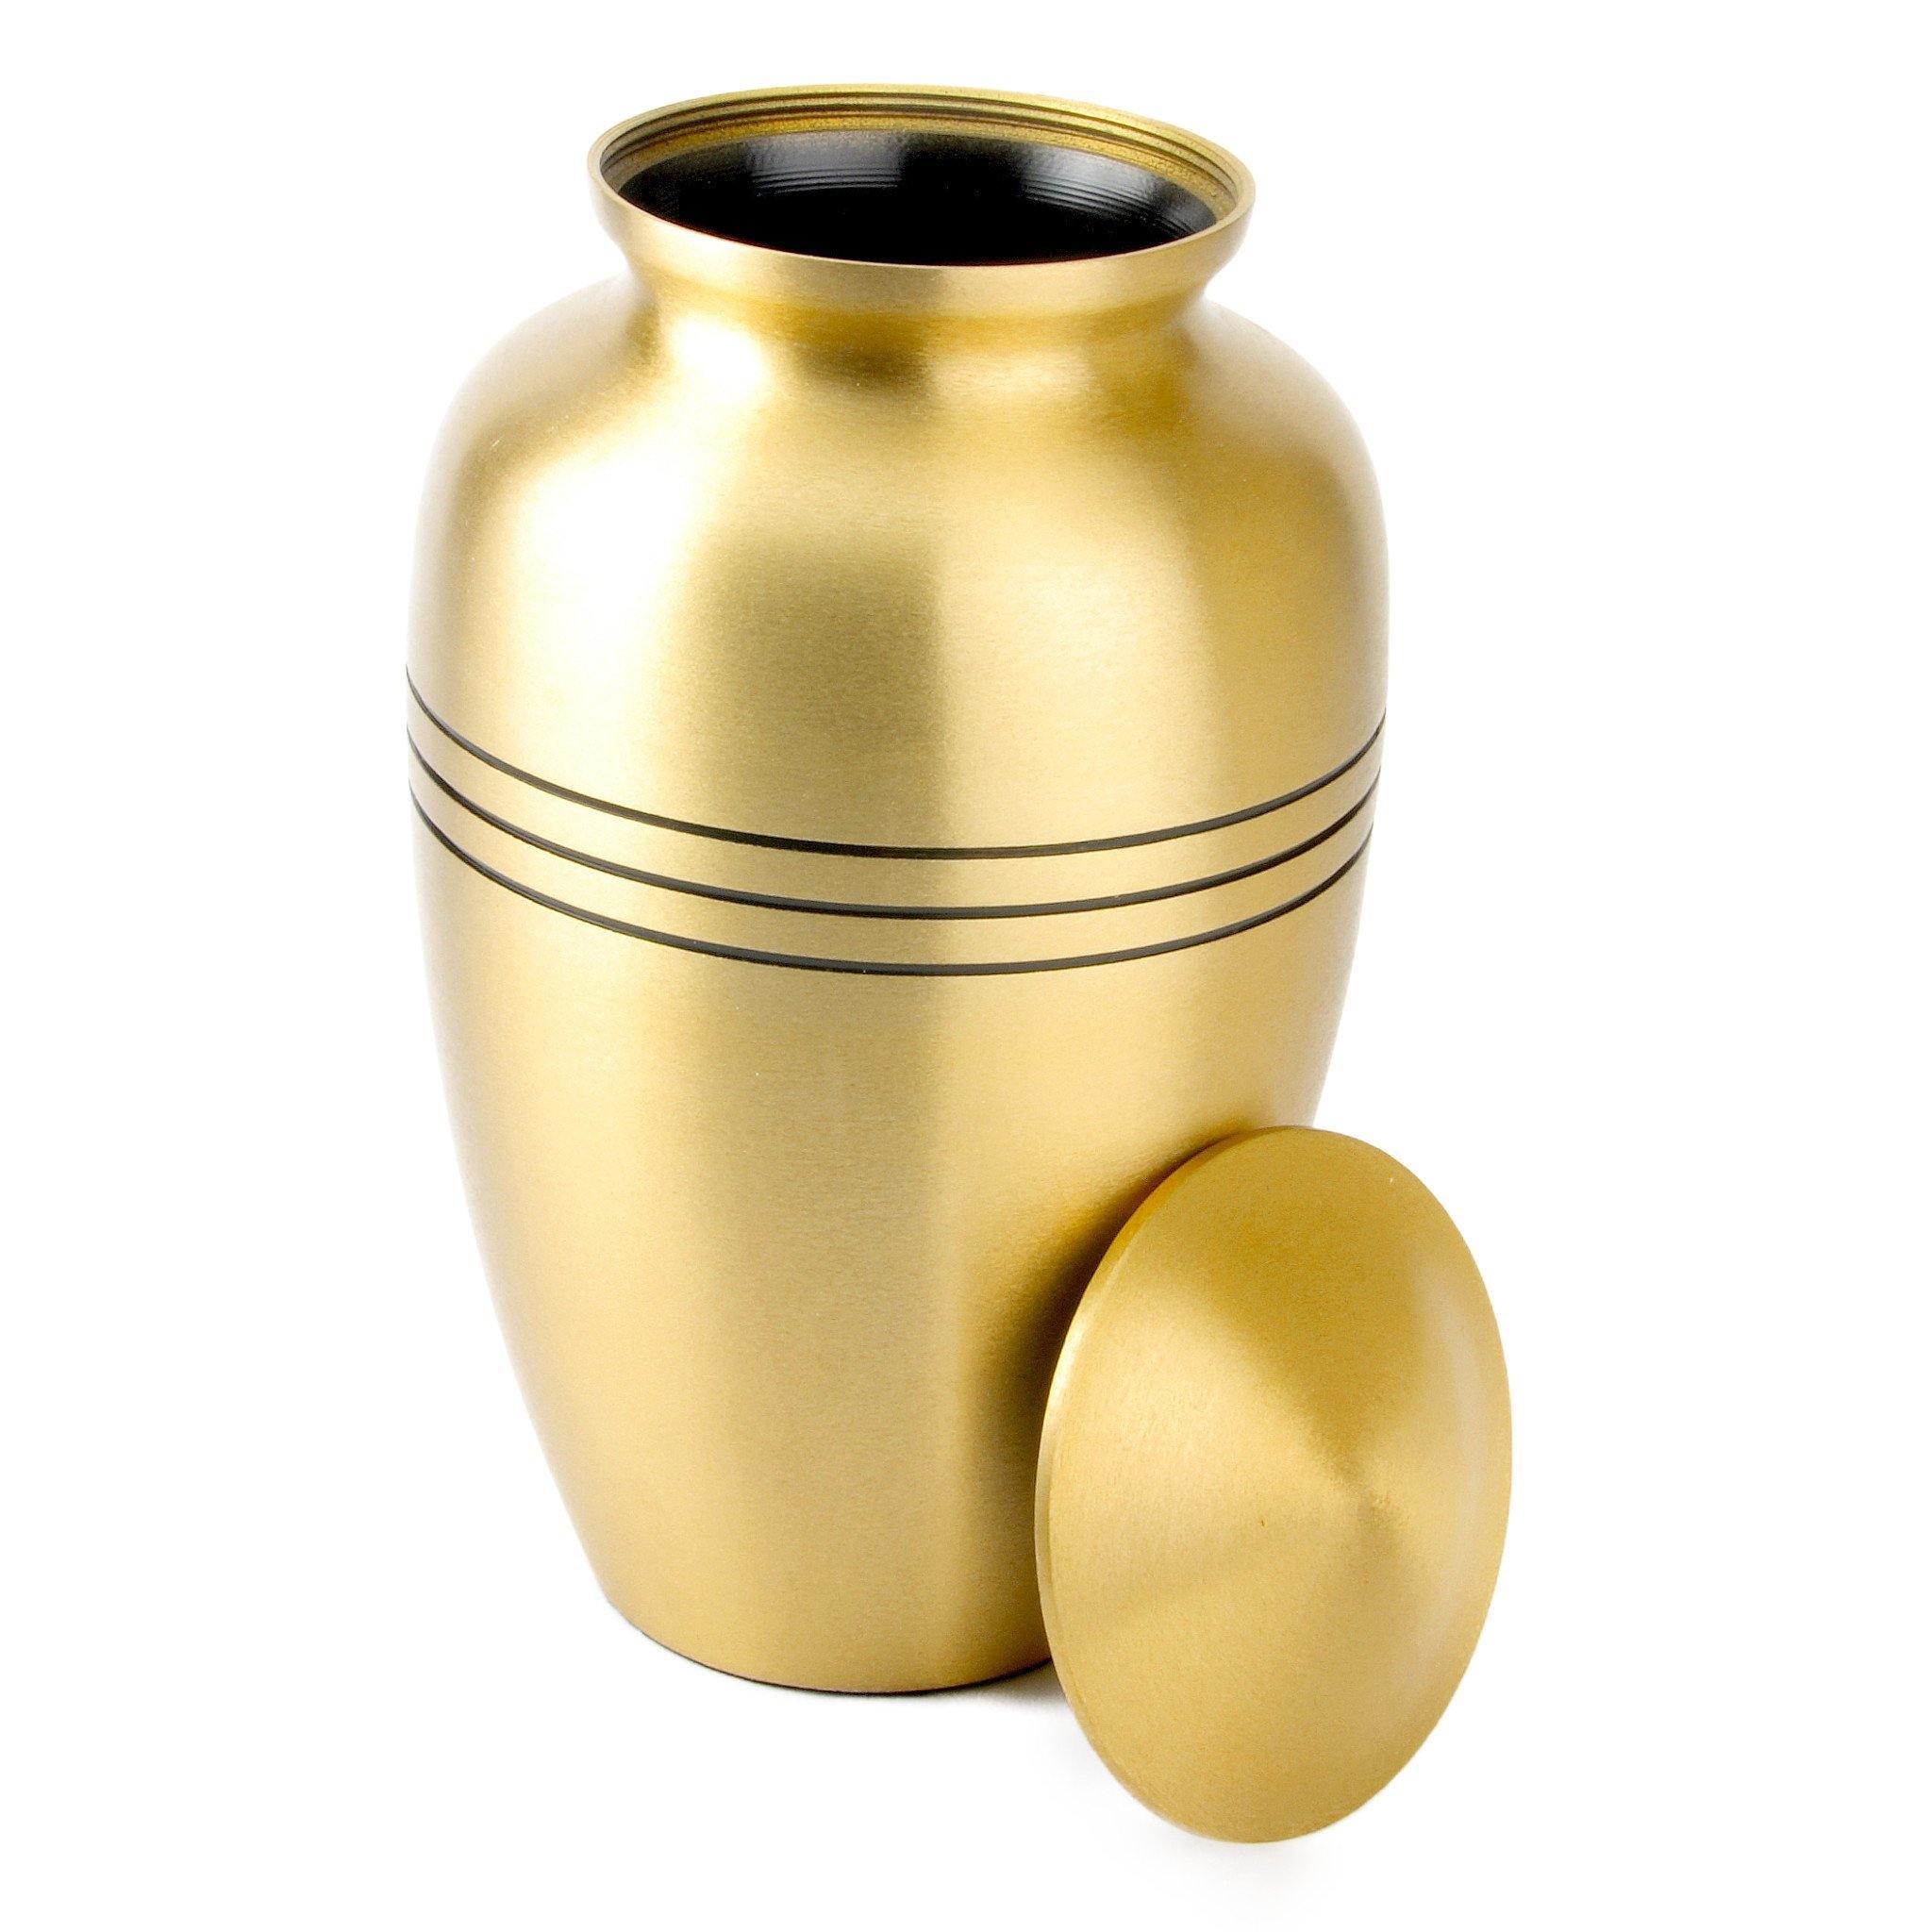 Cheadle Cremation Ashes Urn Adult RC